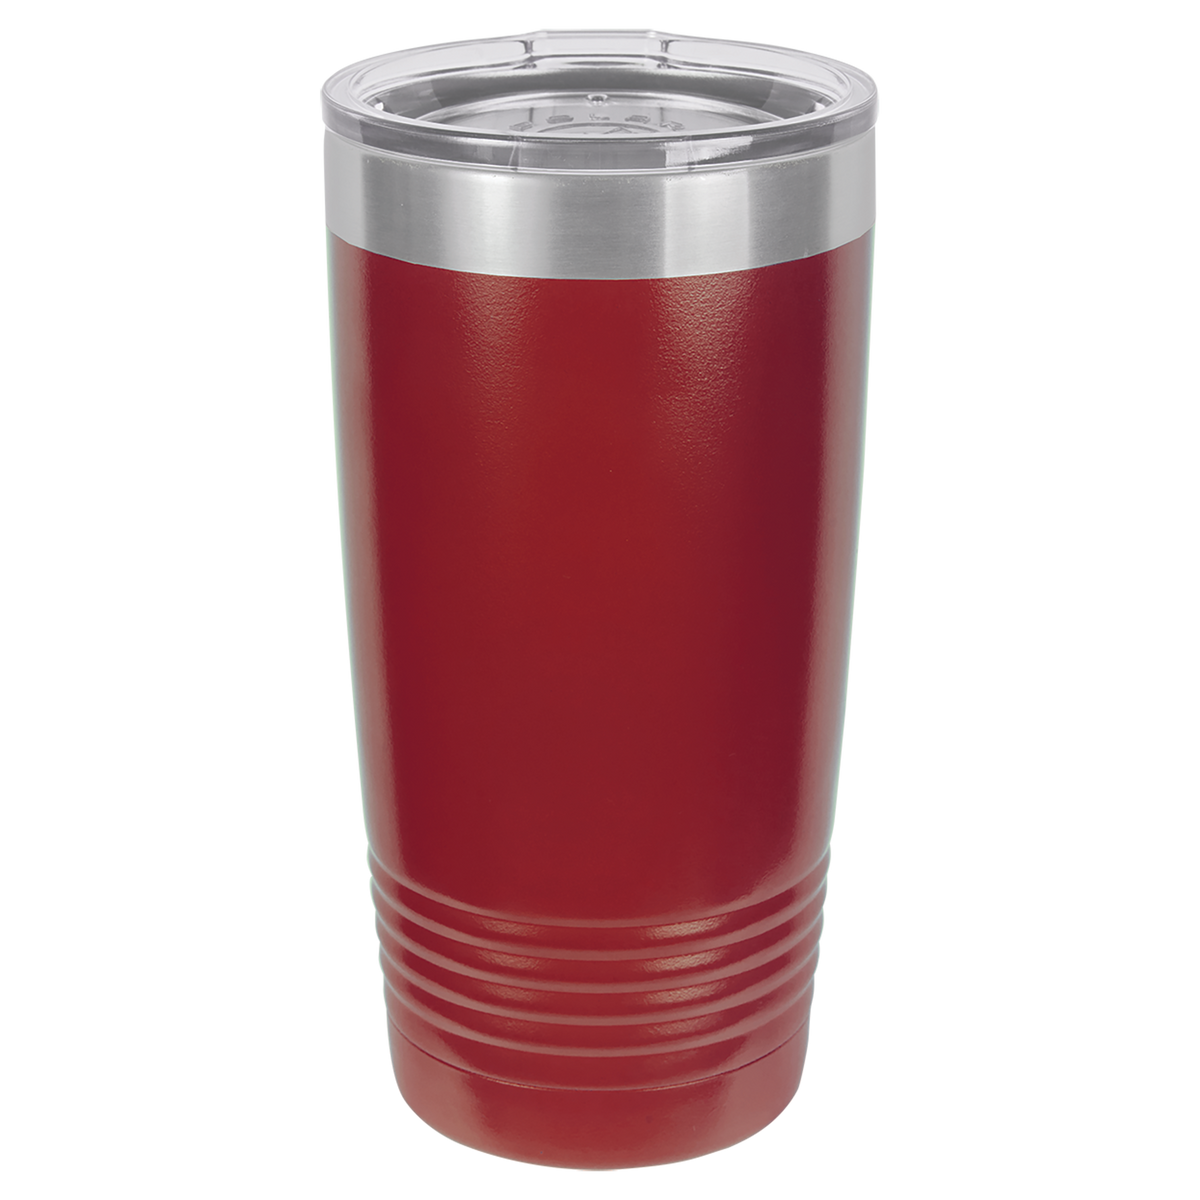 20oz Personalized Insulated Tumbler